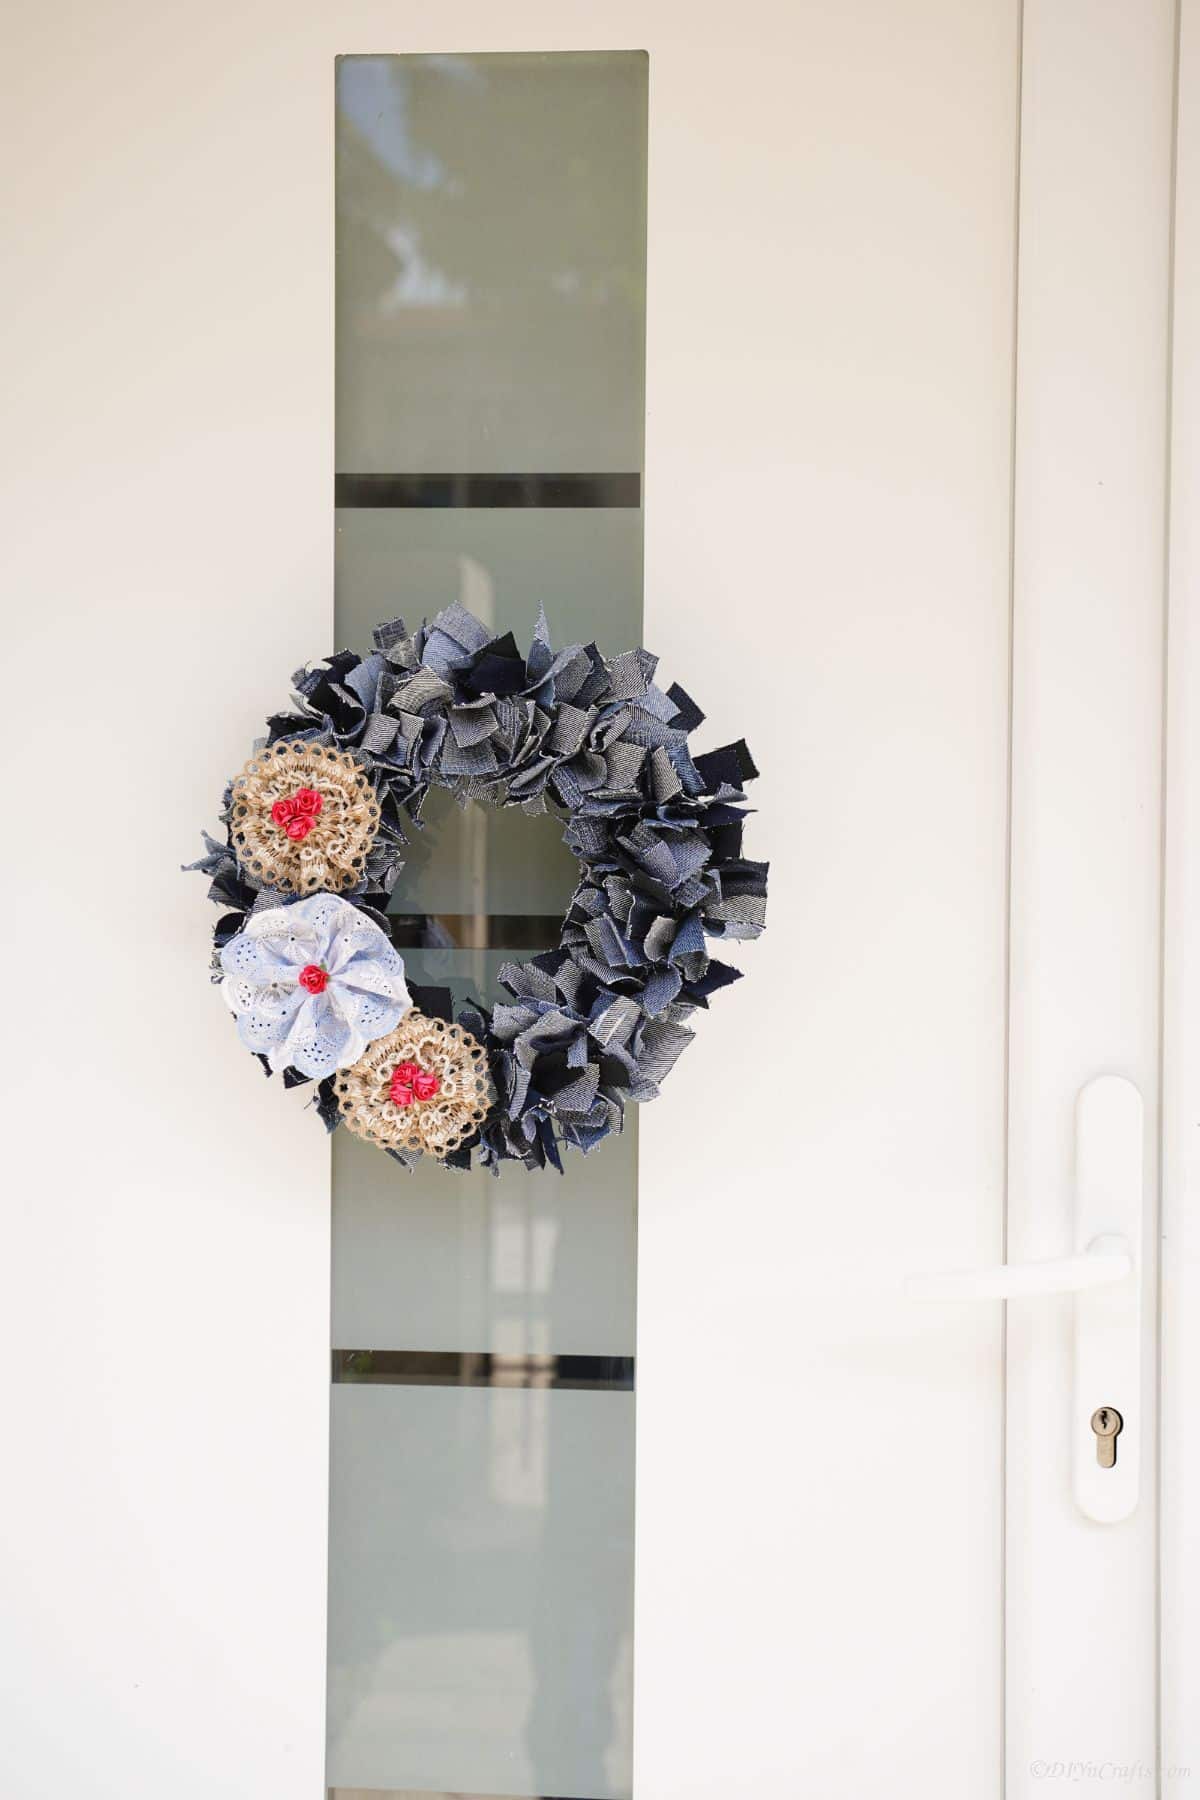 denim and lace wreath hanging on white door with glass panel in center